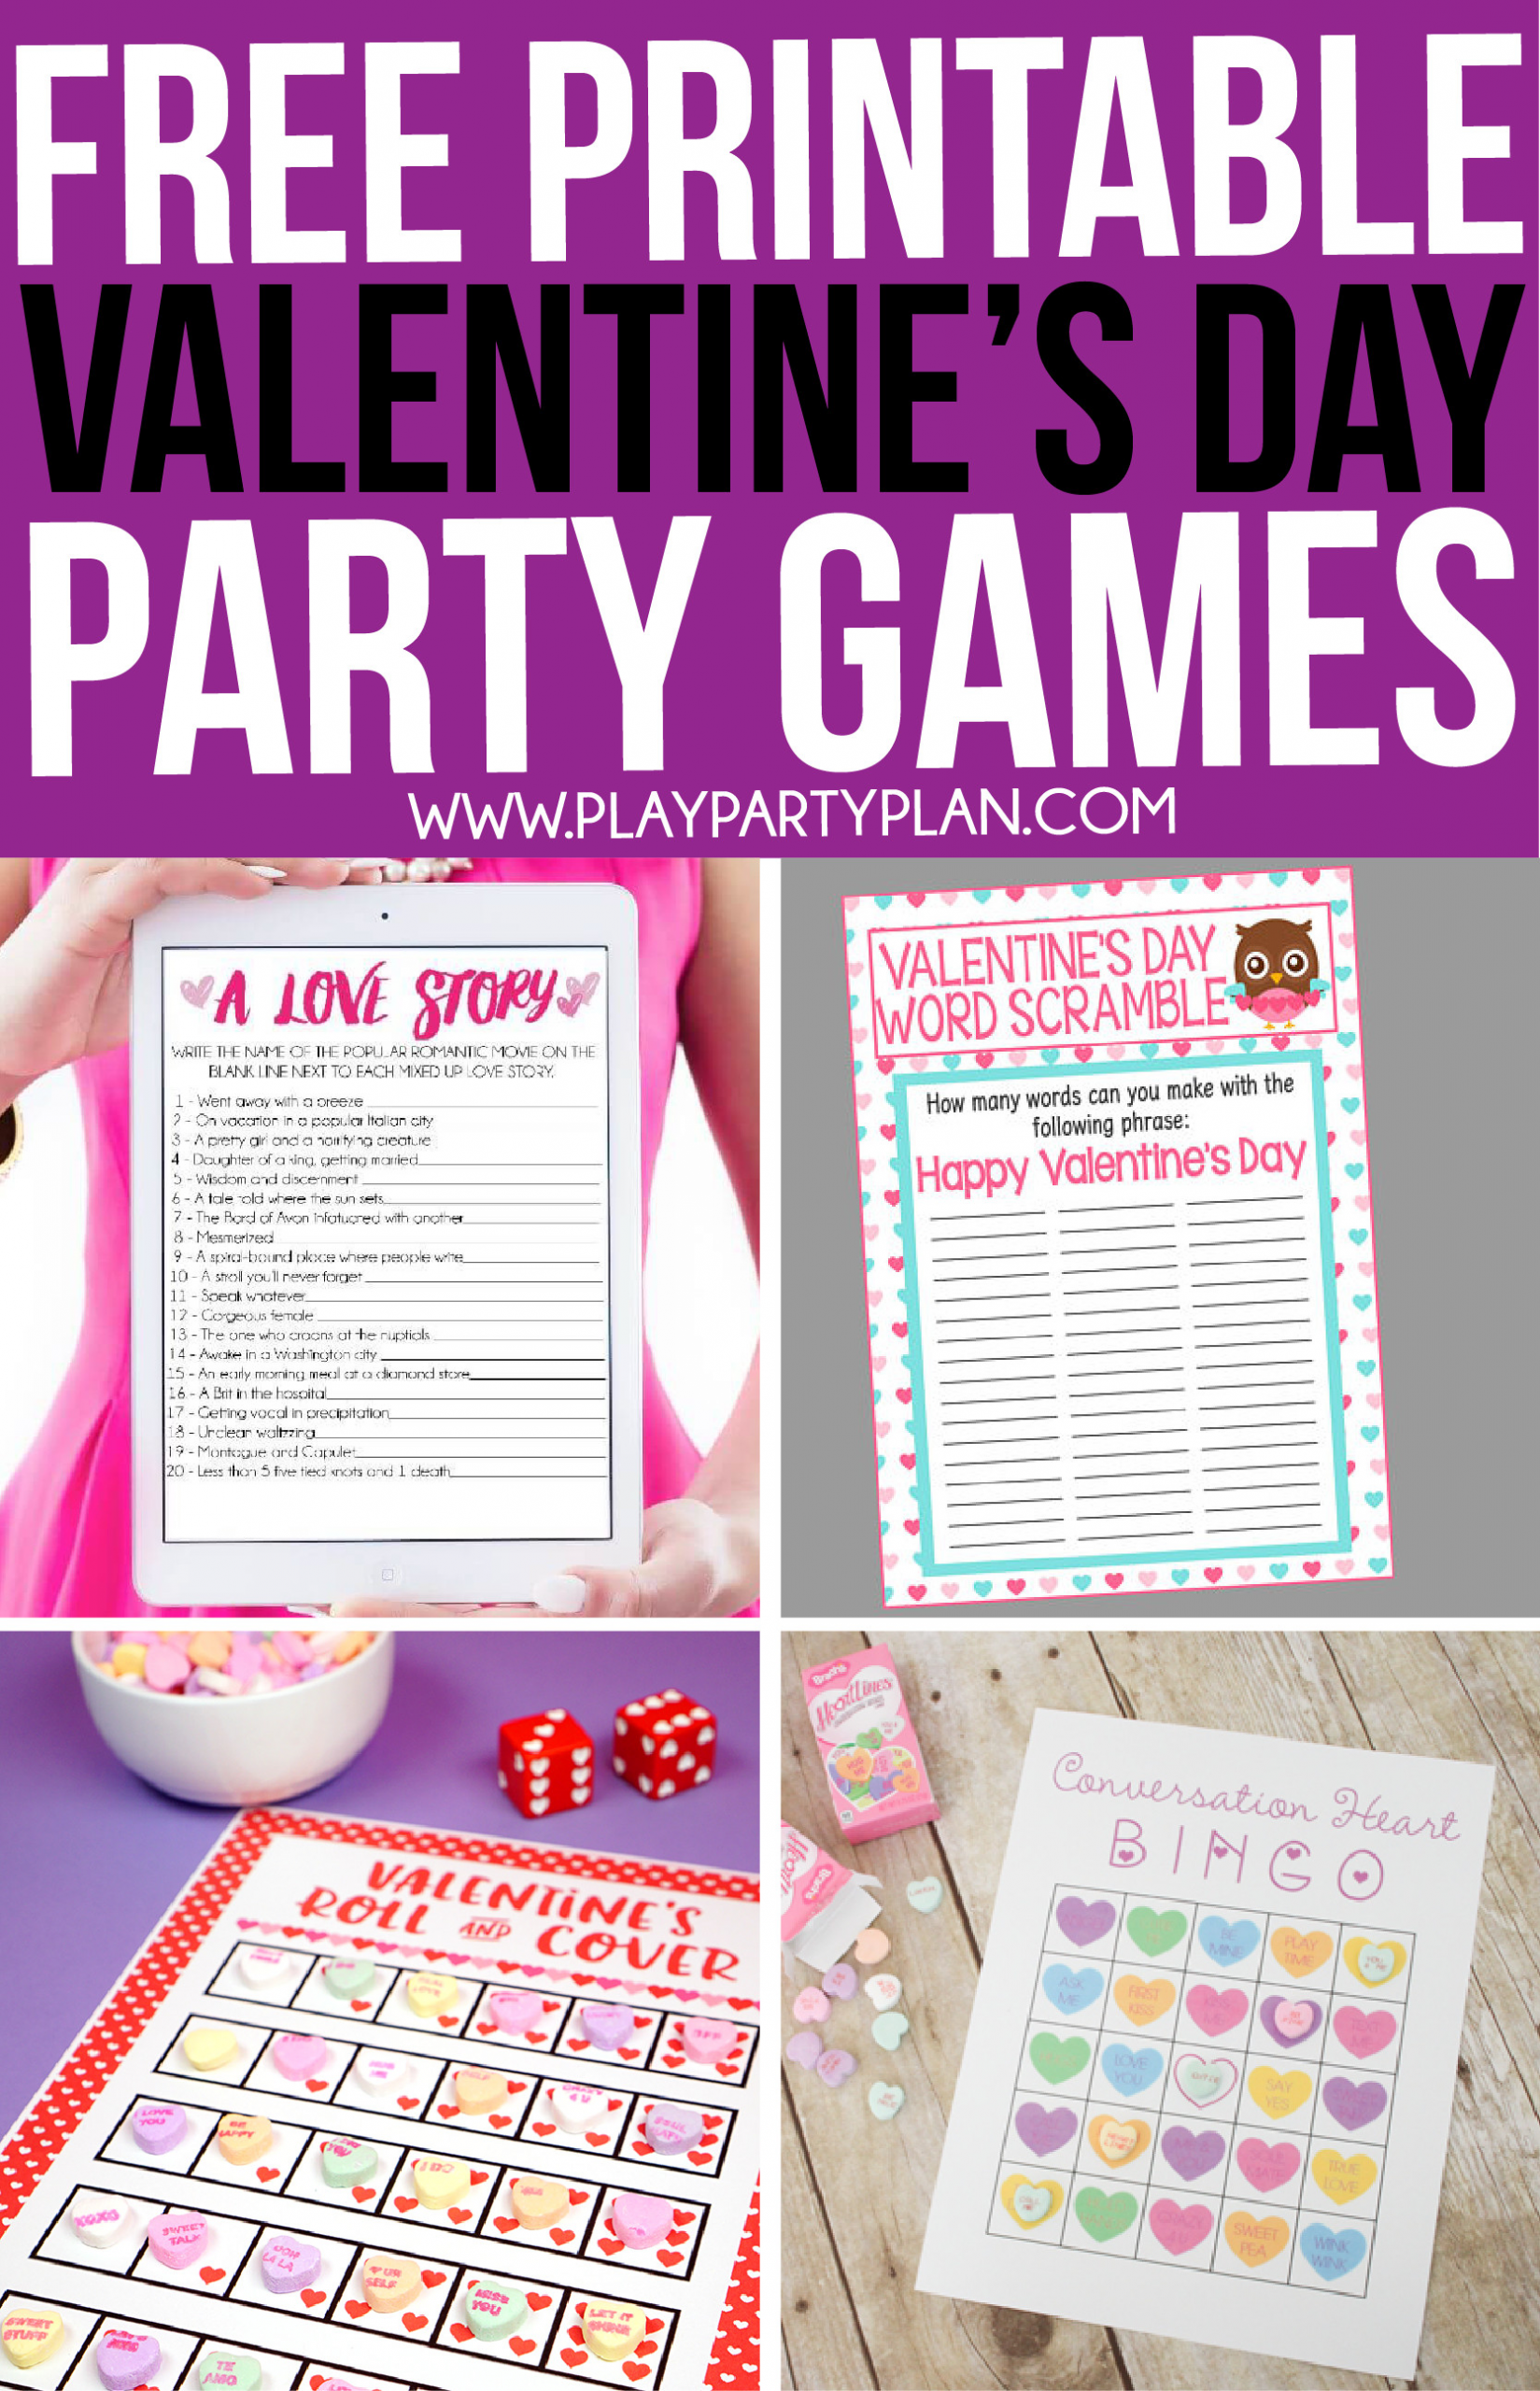 Valentines Day Ideas For Teenage Couples
 30 Valentine s Day Games Everyone Will Love